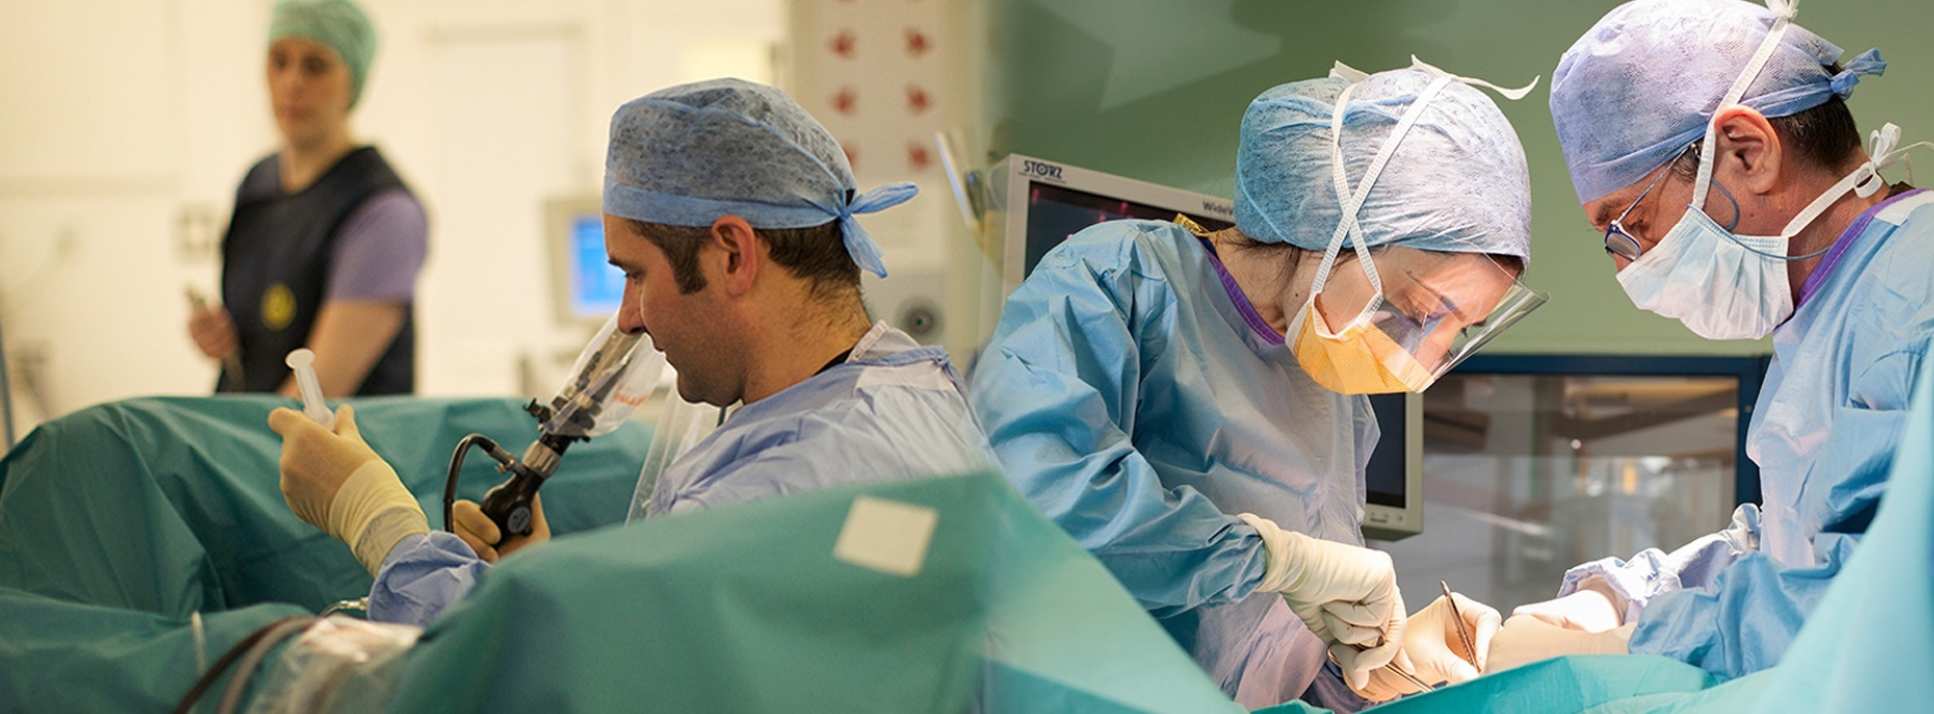 Clinicians in the operating theatre